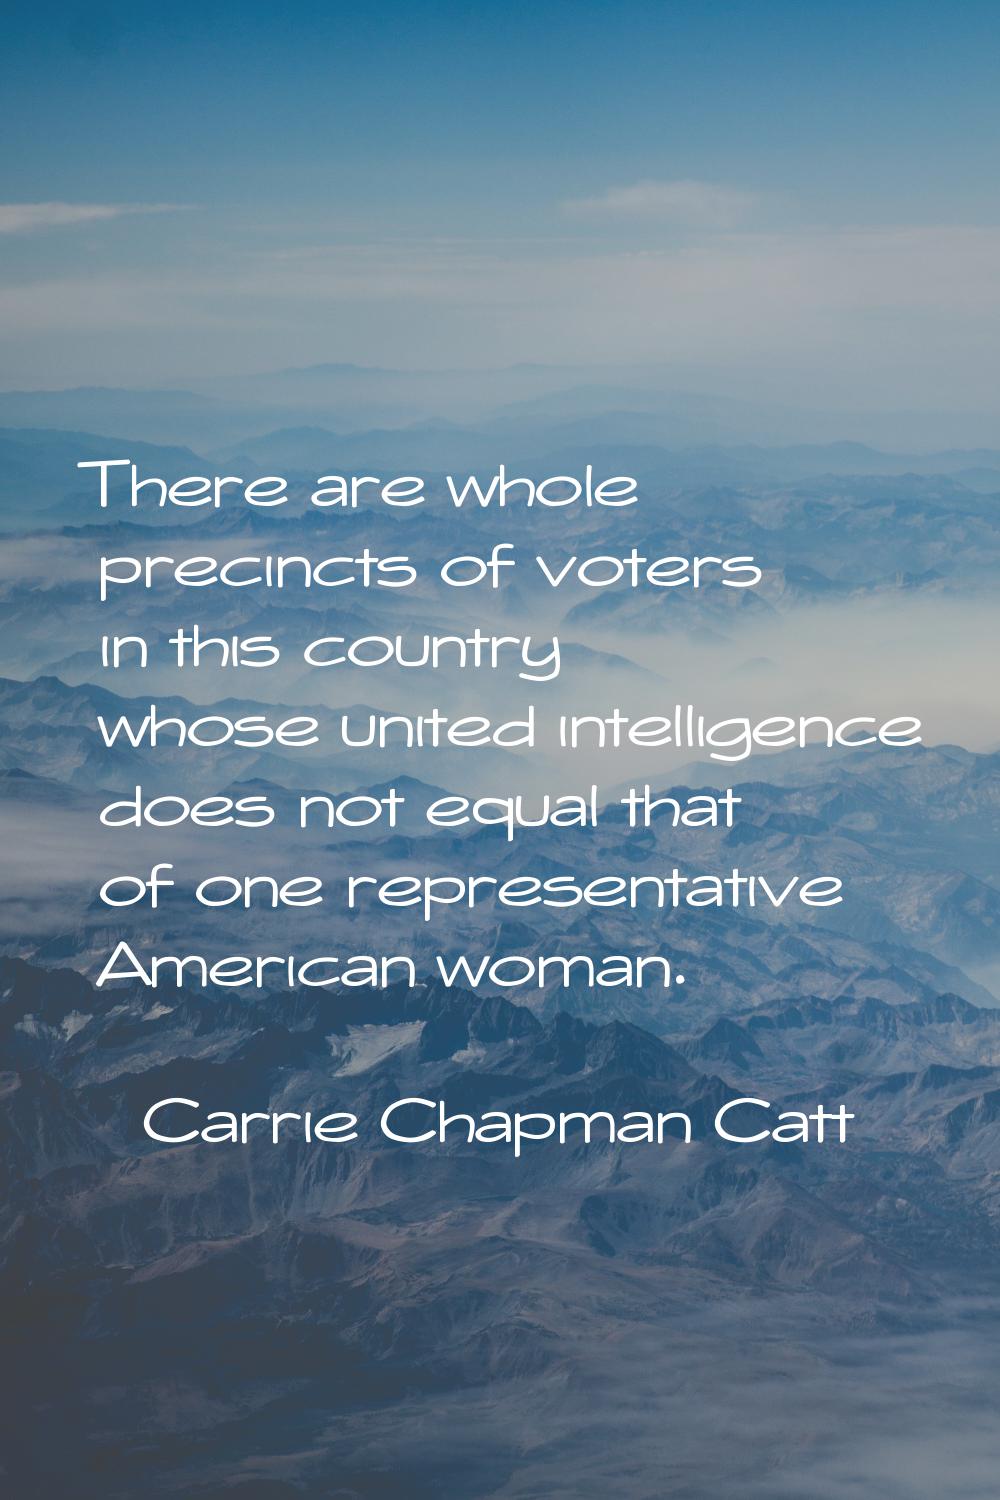 There are whole precincts of voters in this country whose united intelligence does not equal that o